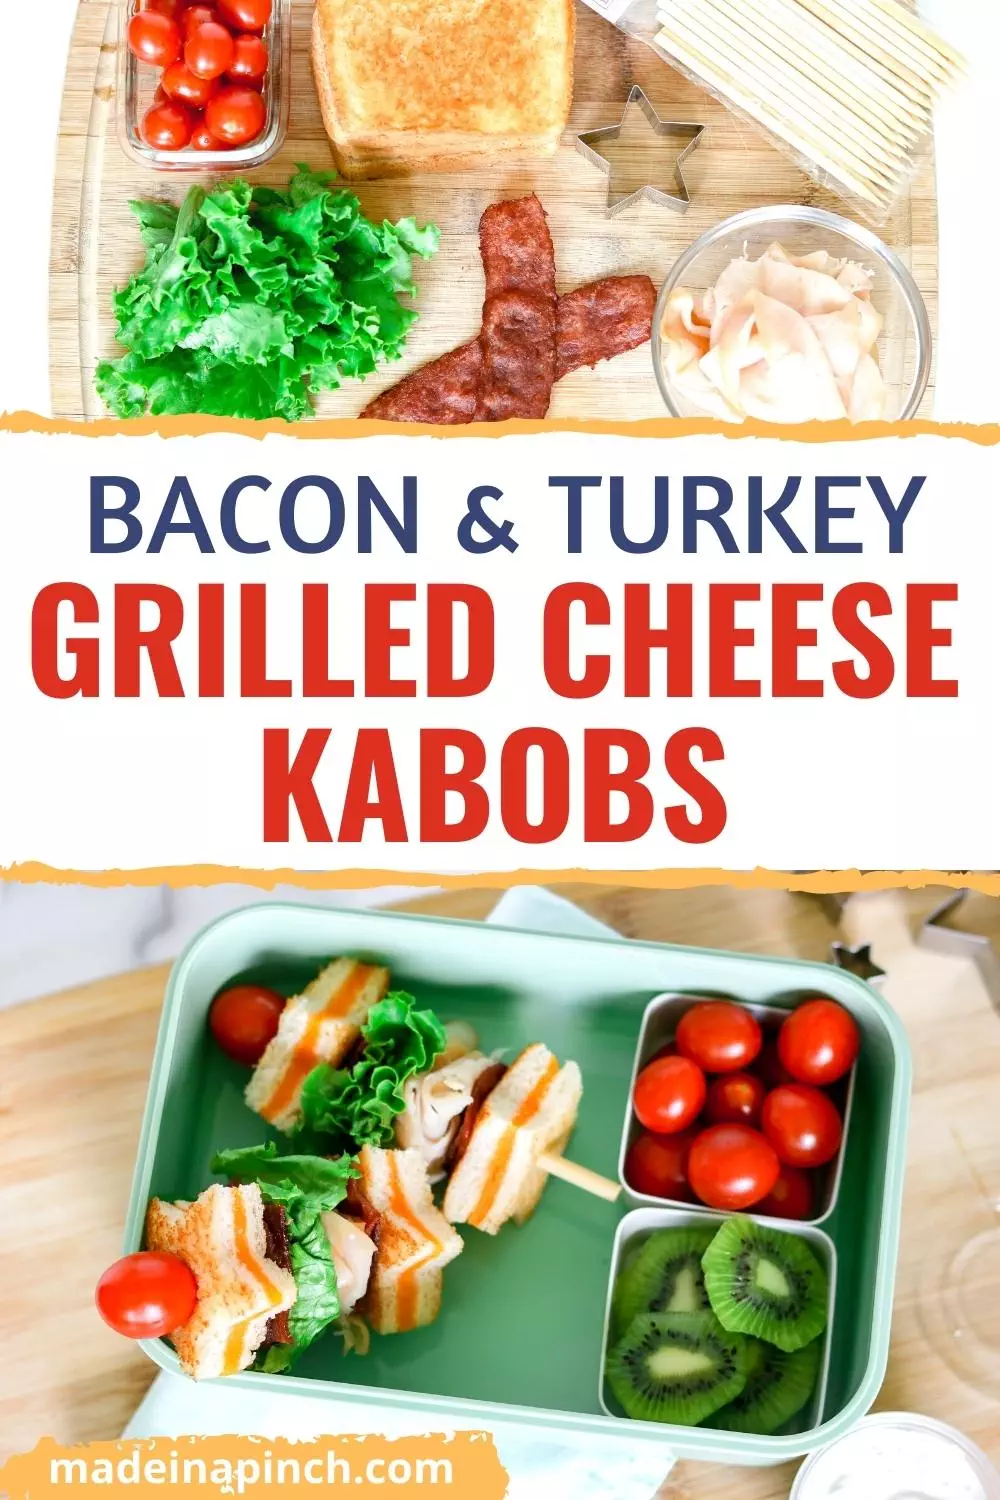 bacon, turkey and grilled cheese kabobs pin image